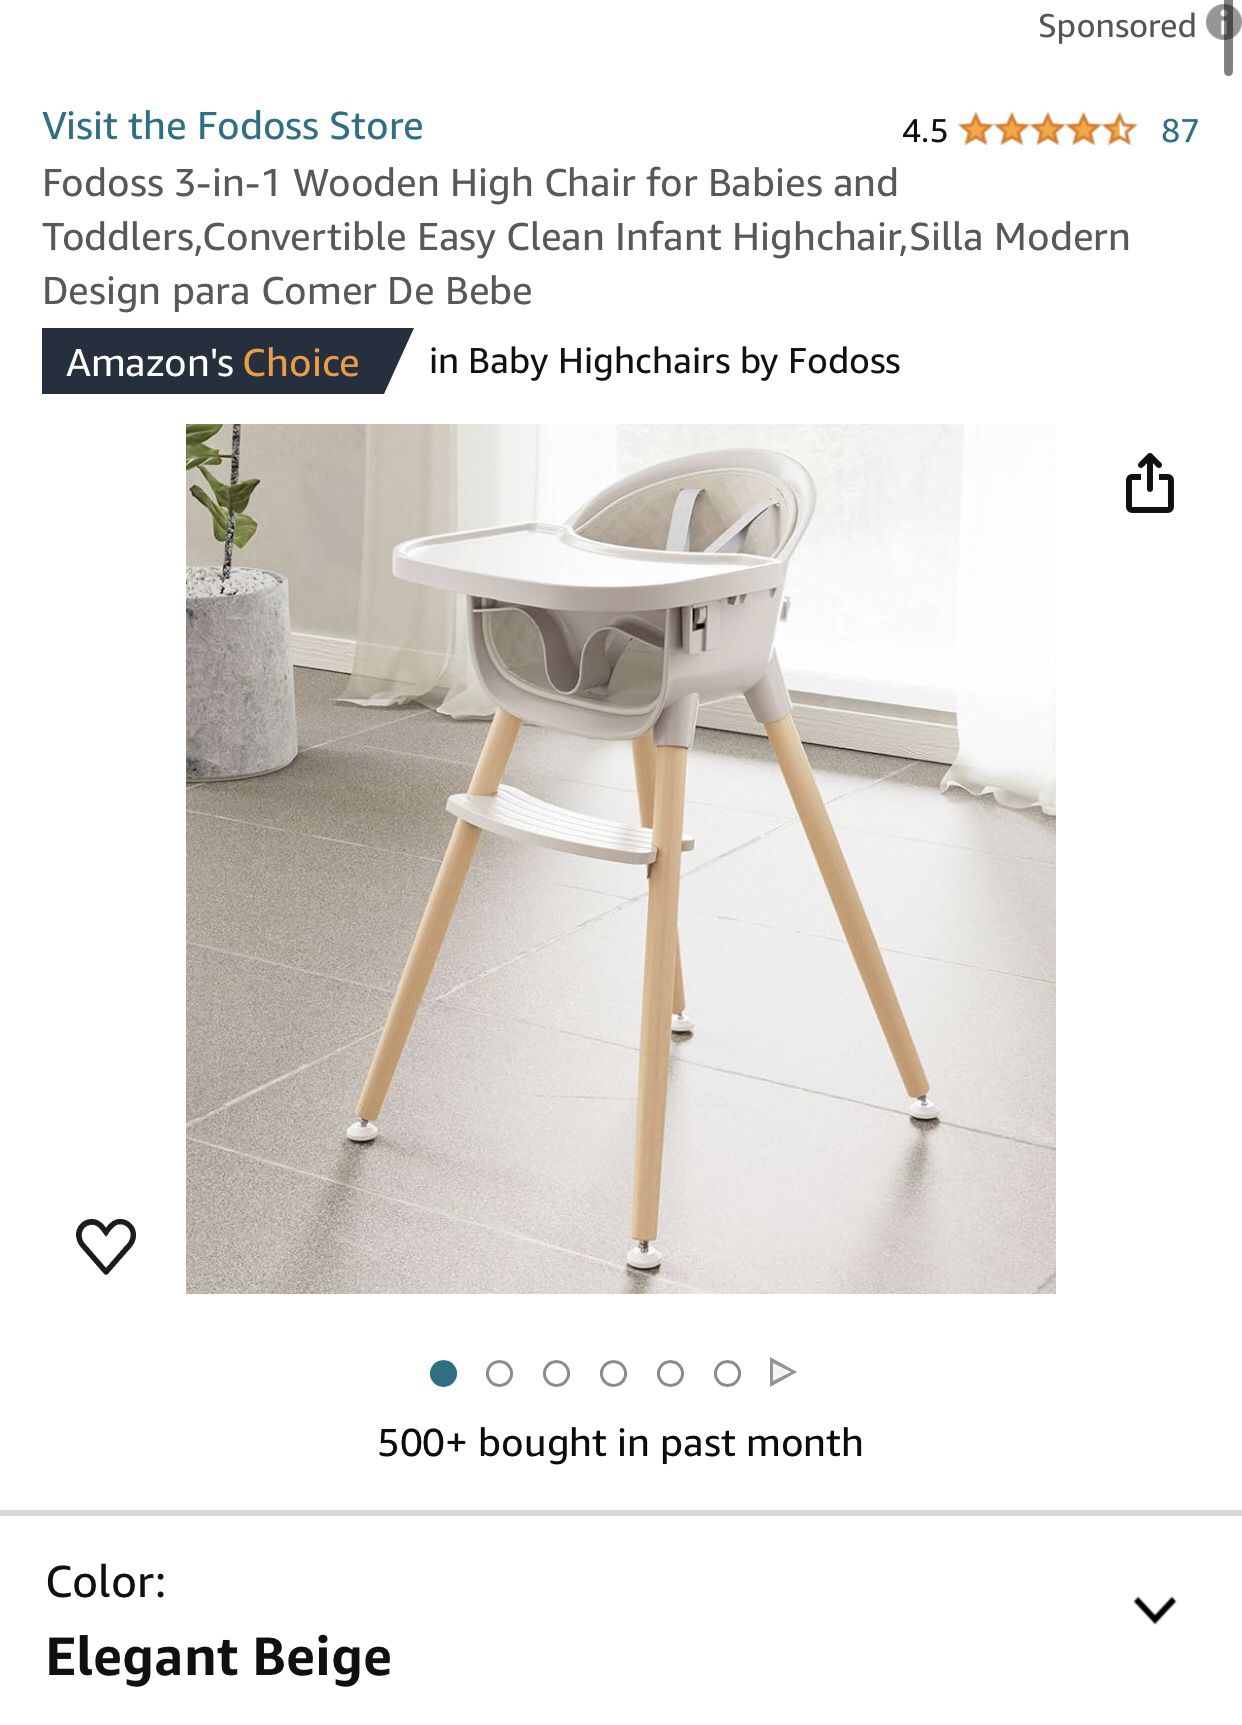 Fodoss 3-in-1 Wooden High Chair for Babies and Toddlers,Convertible Easy Clean Infant Highchair